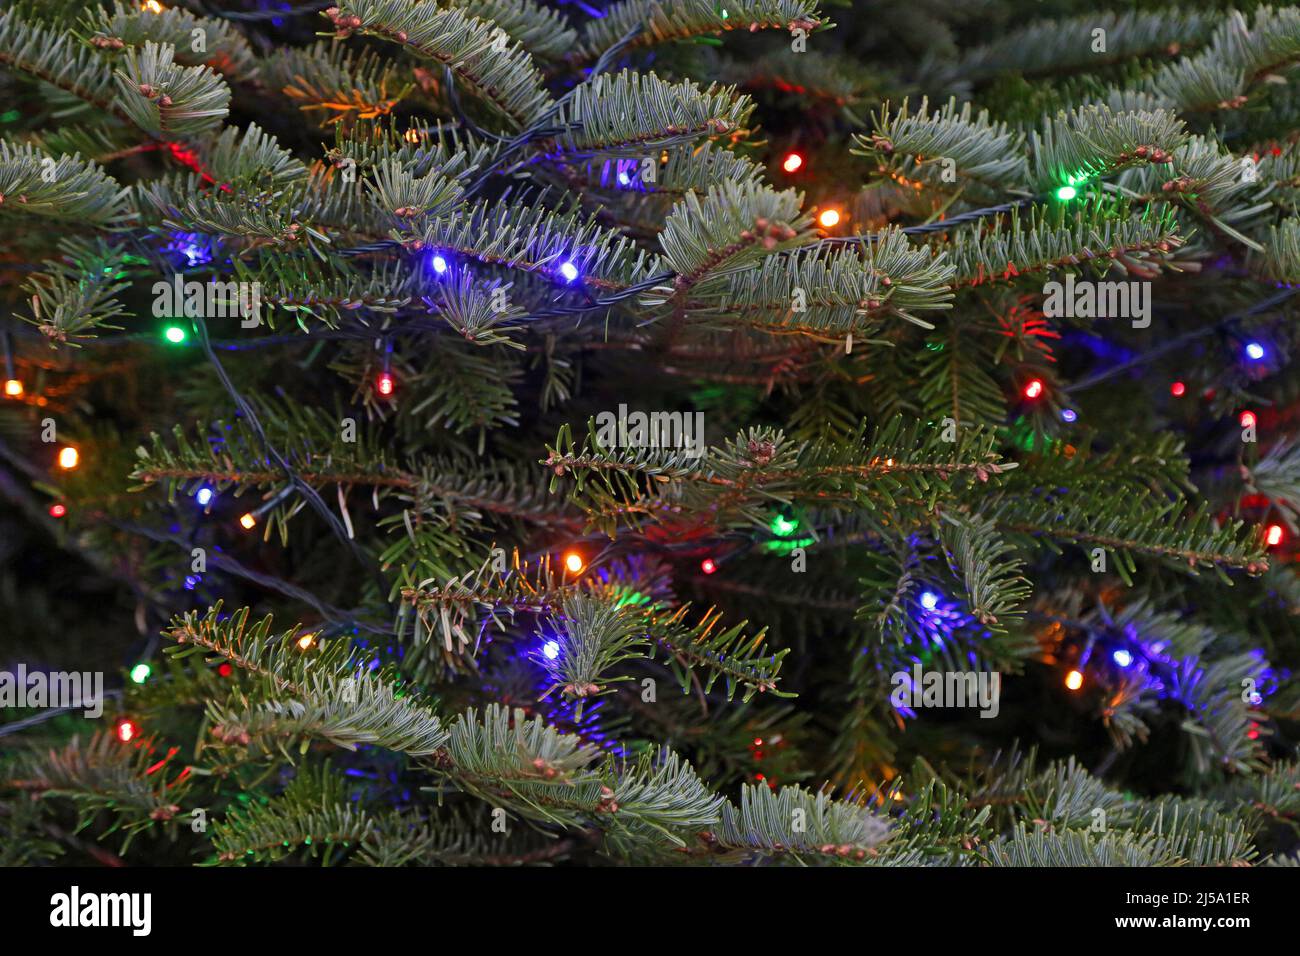 Spruce tree with Christmas lights Stock Photo